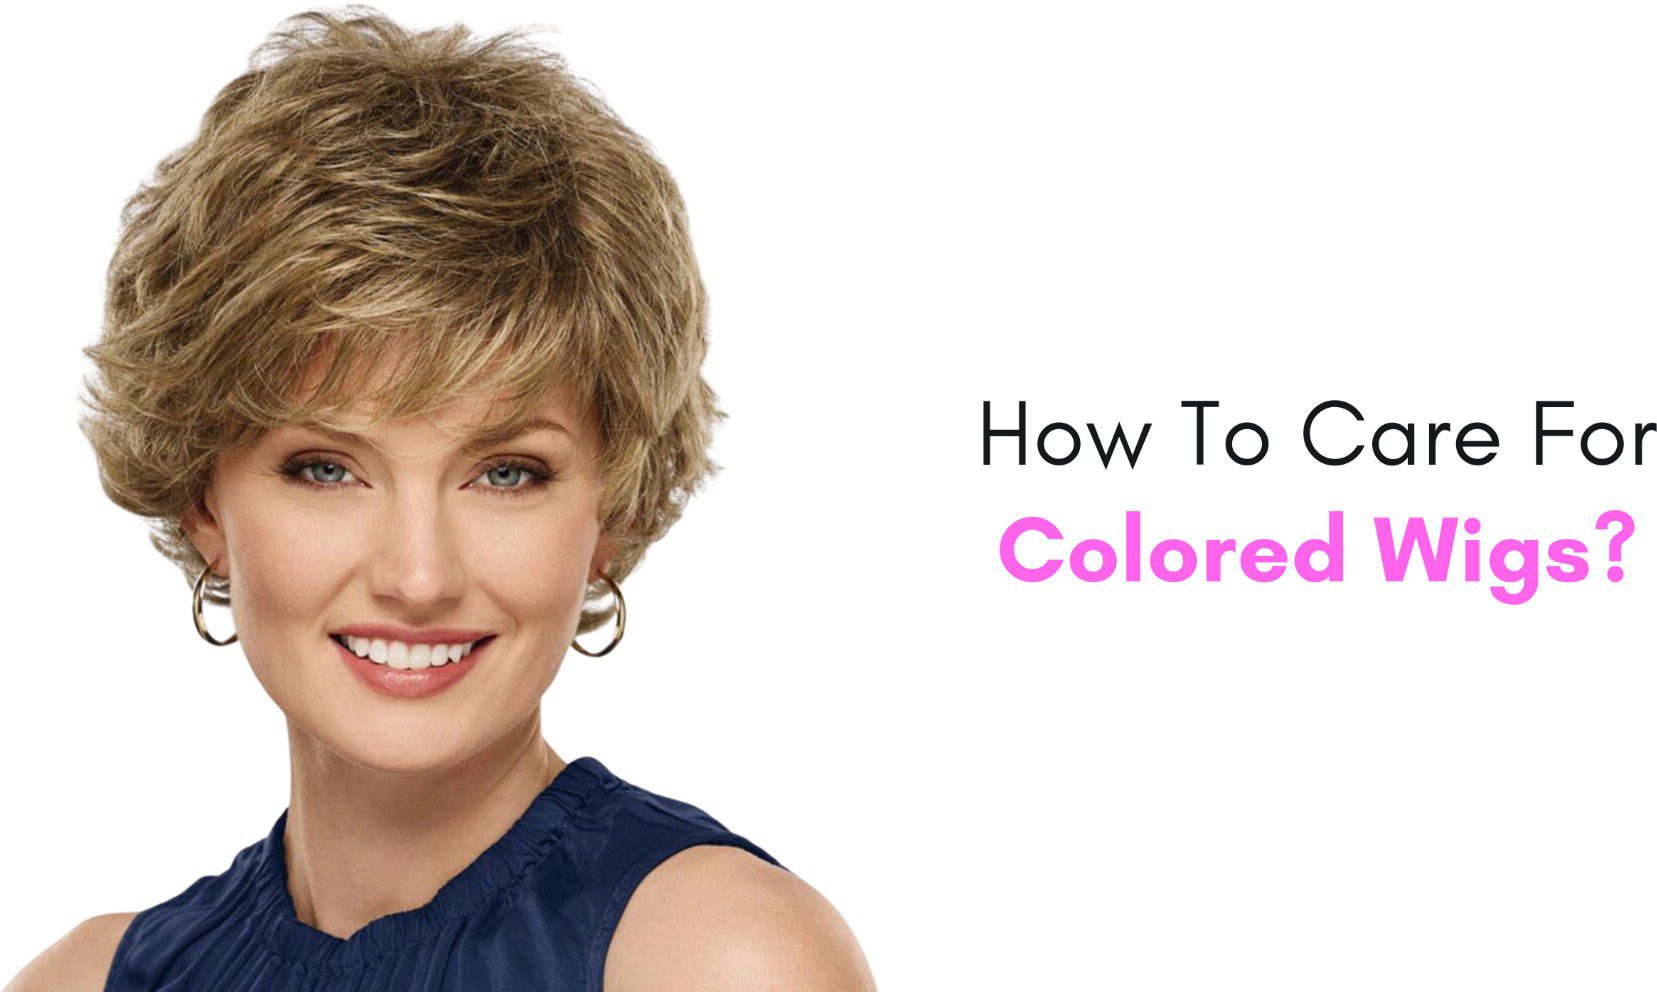 How To Care For Colored Wigs?